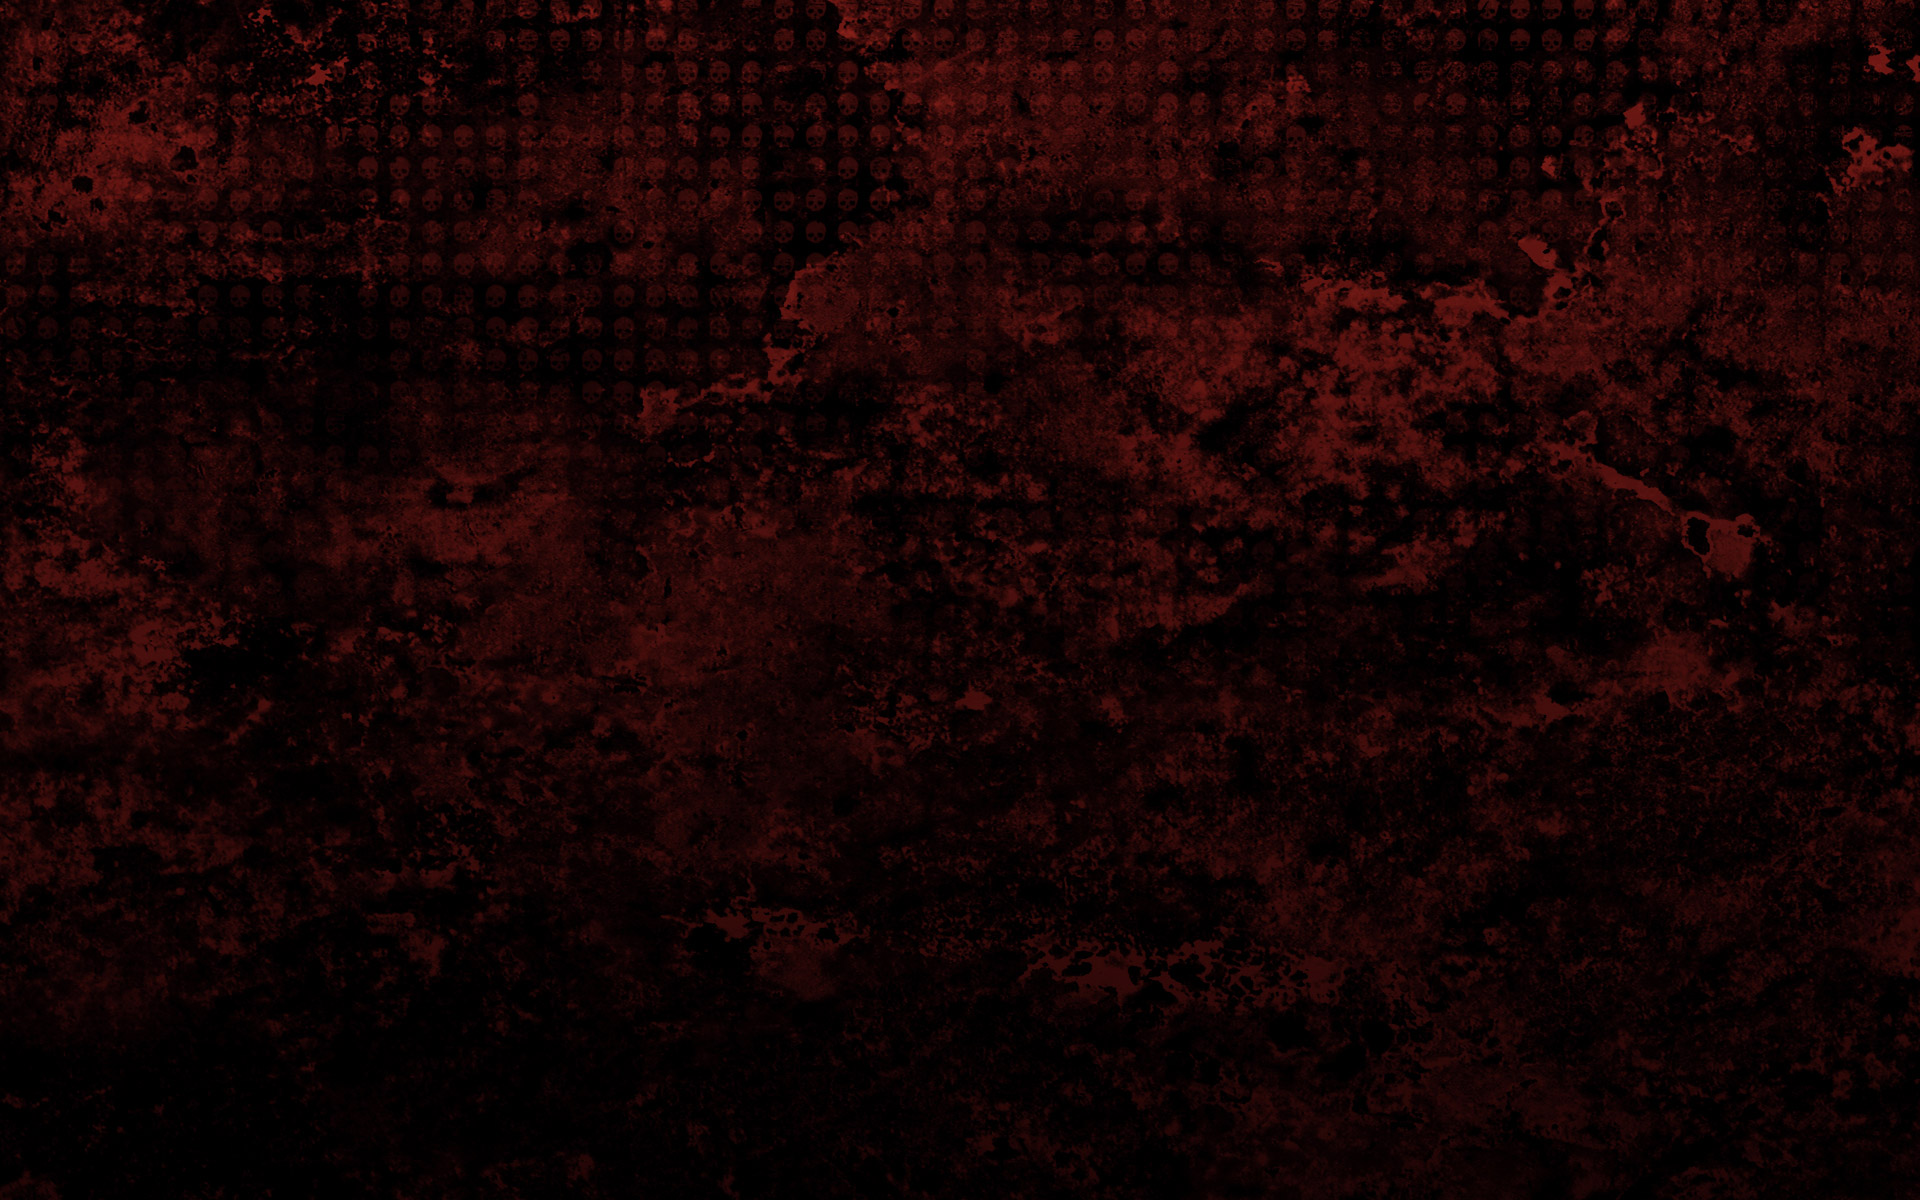 red and black design wallpapers55com   Best Wallpapers for PCs